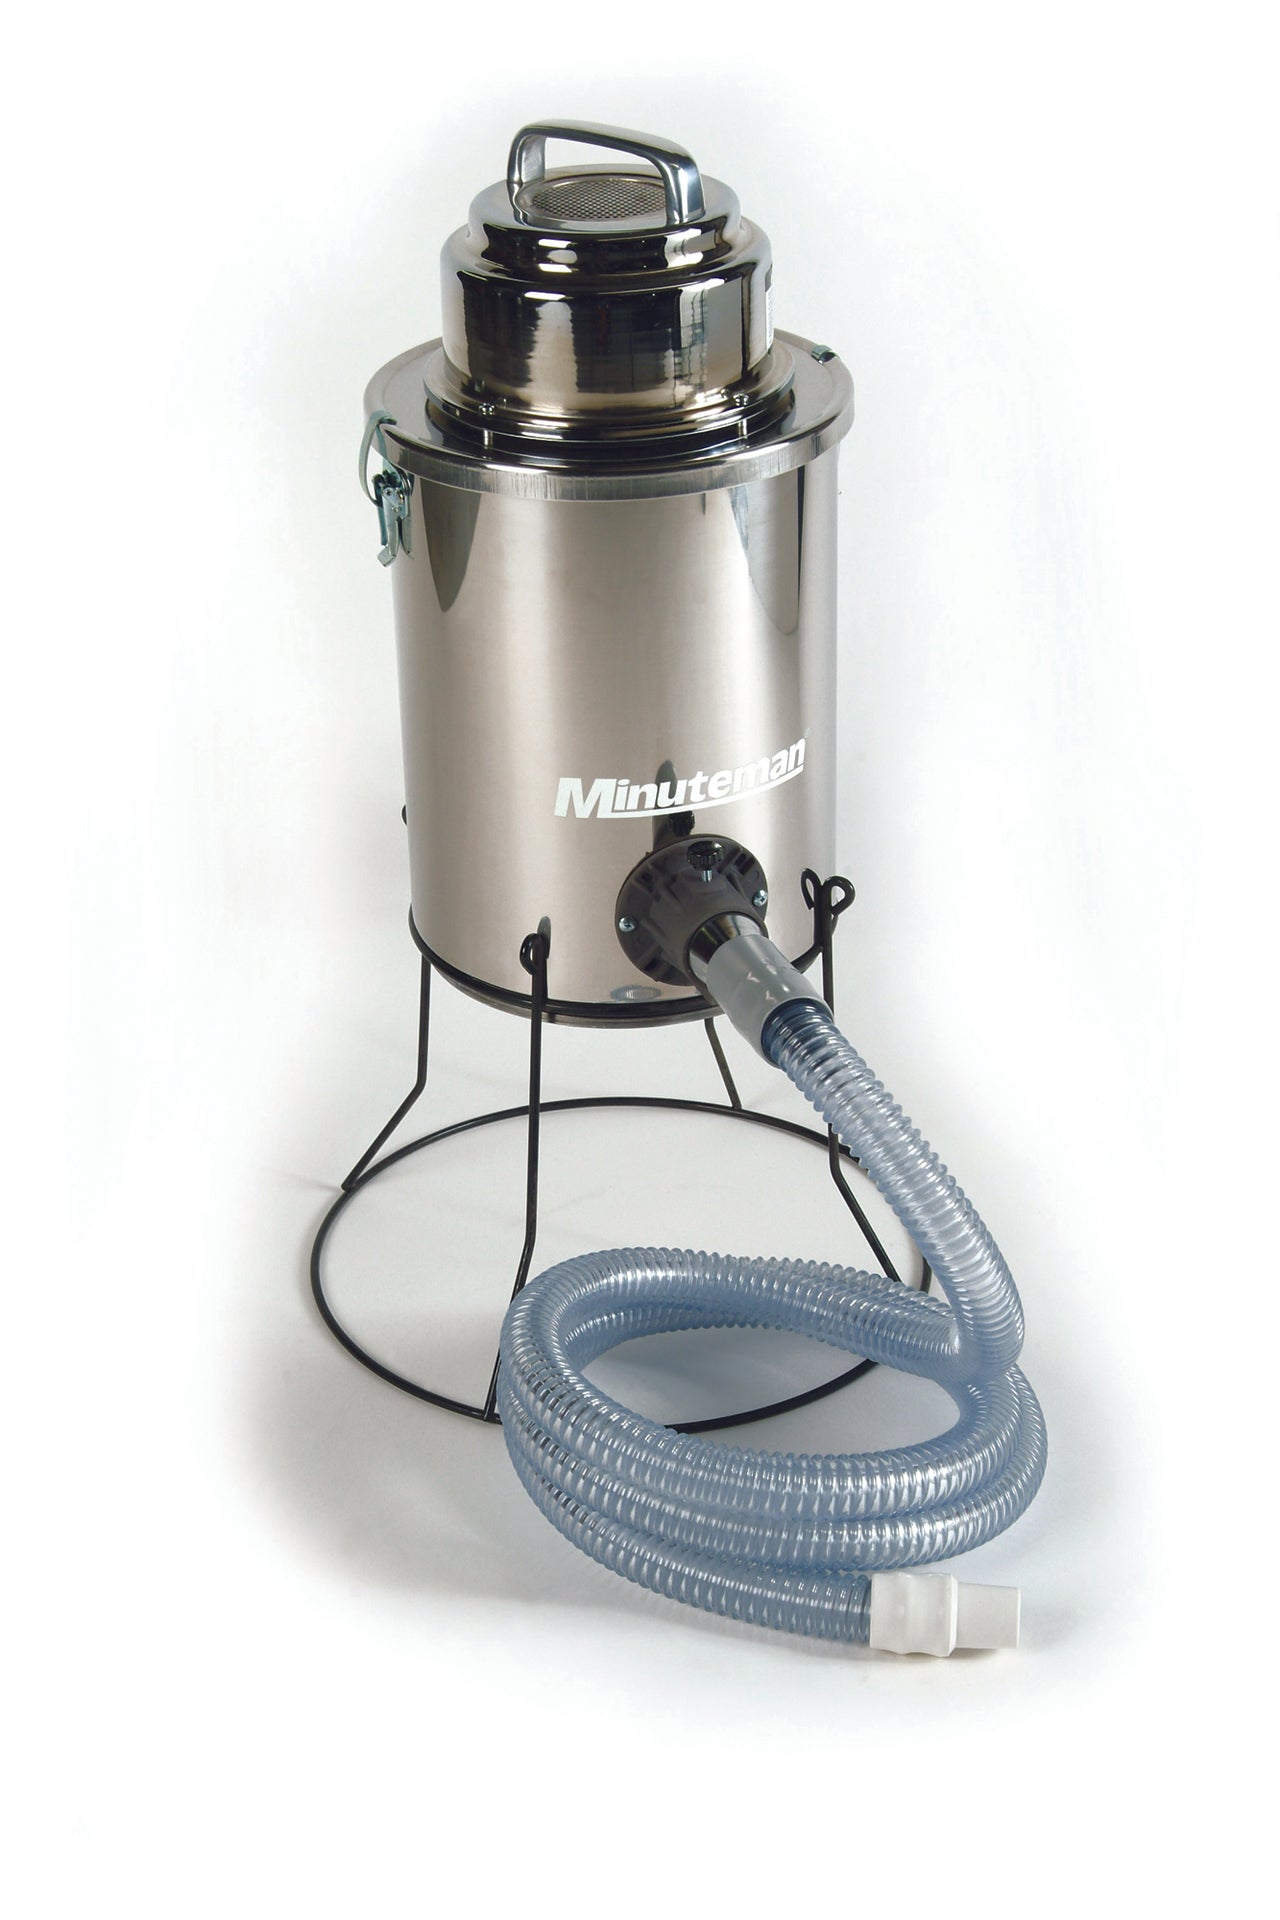 Minuteman 6-Gallon Maxi-Guard II Mercury Recovery System Dry Only